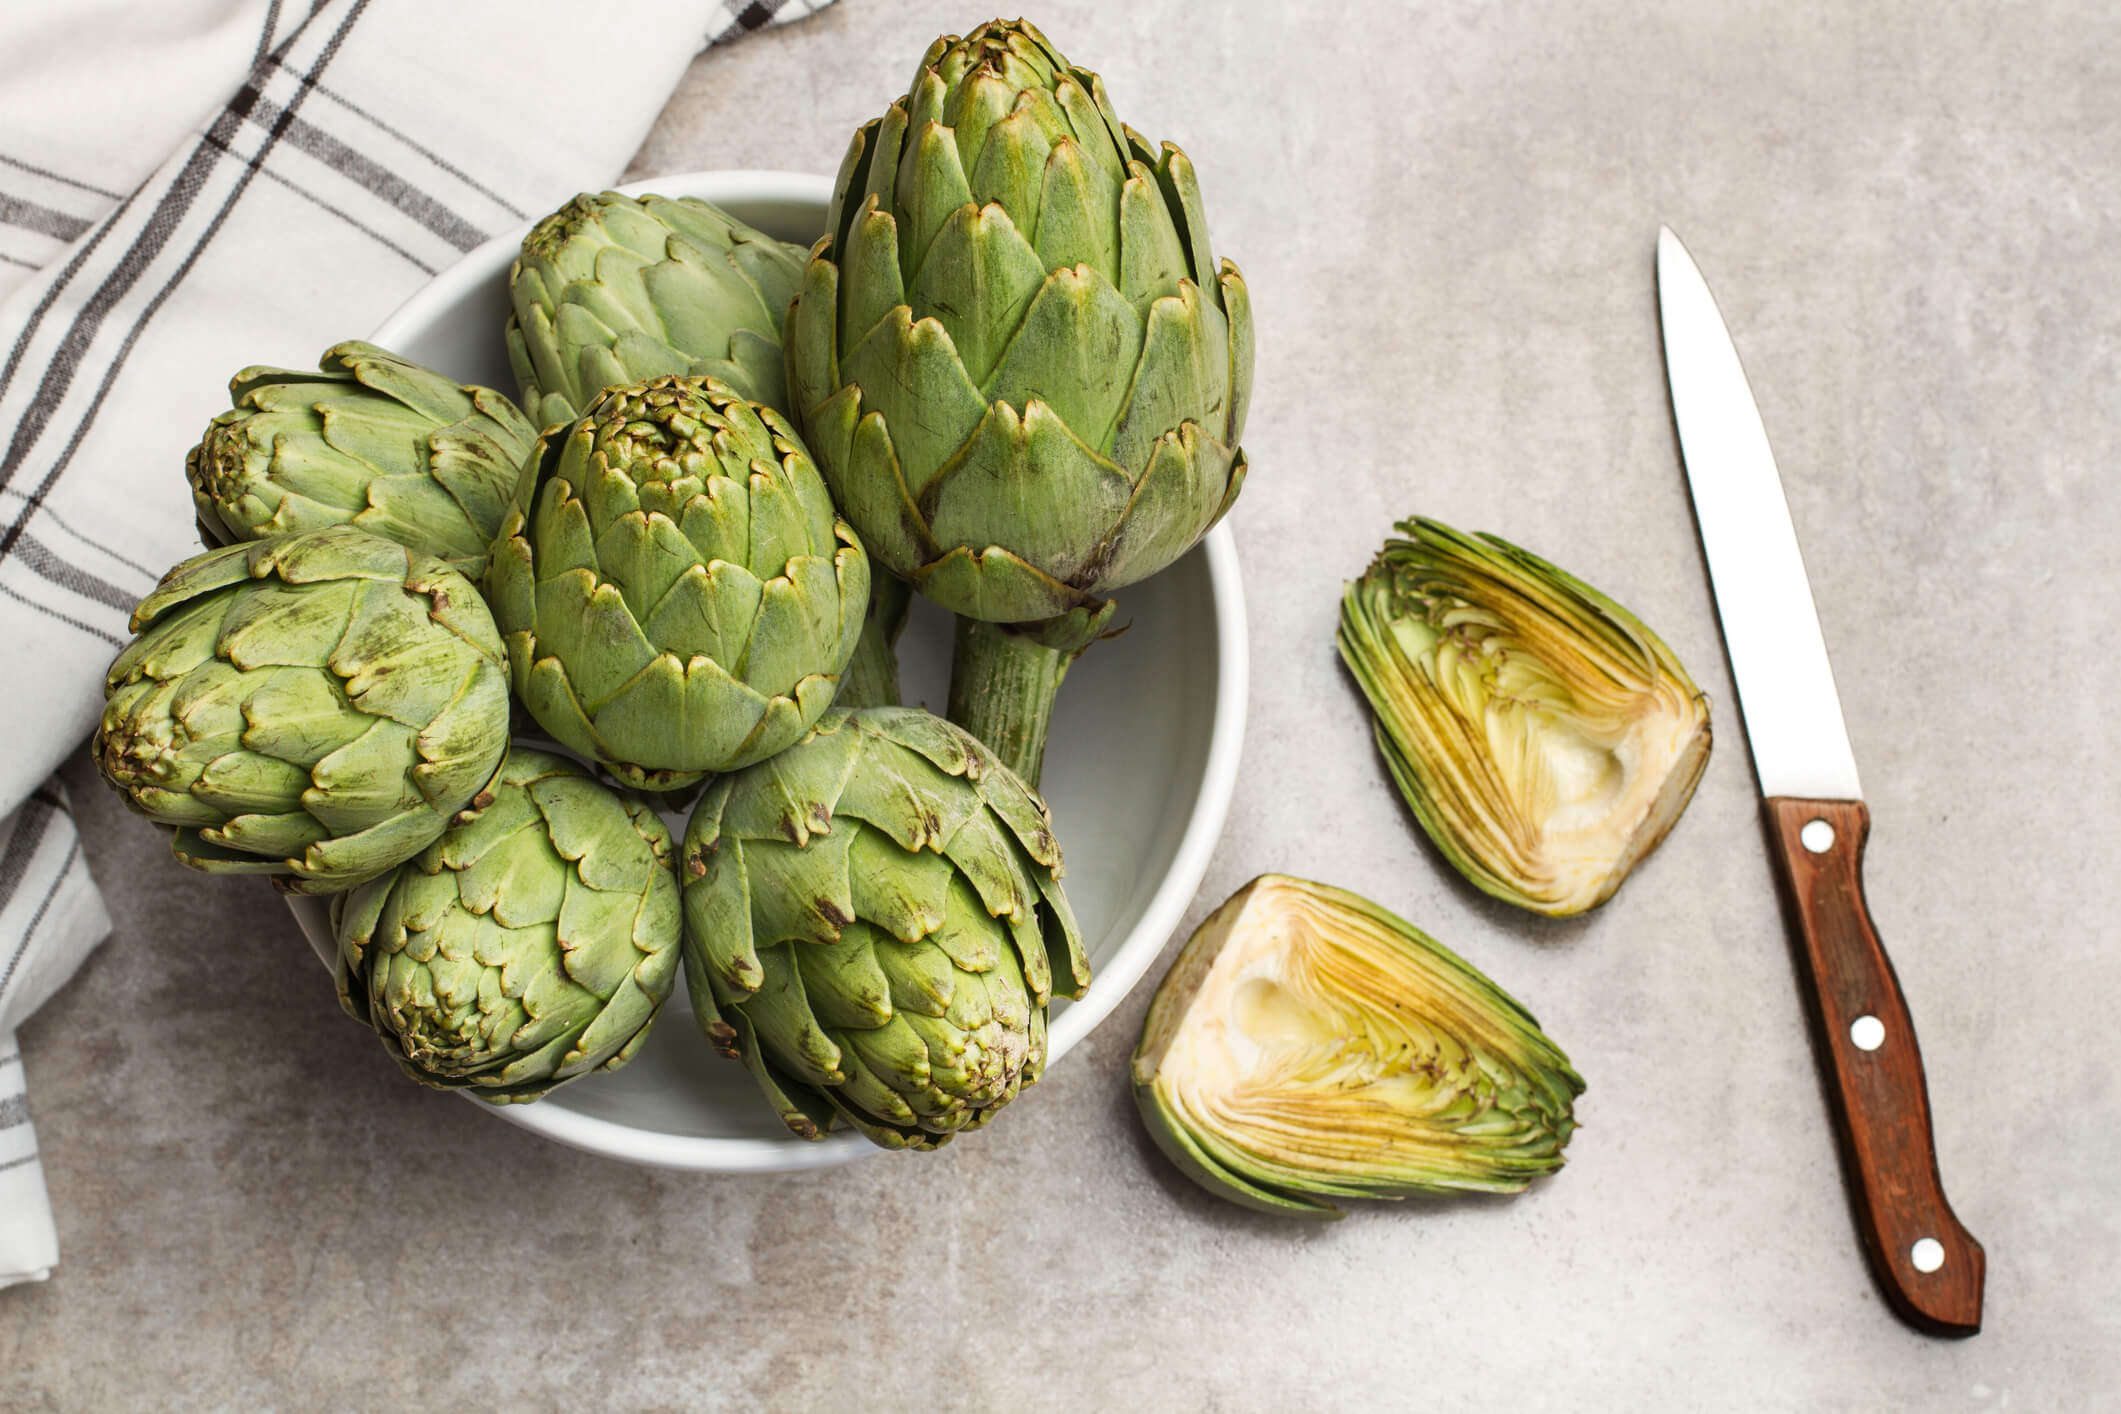 Spring vegetables and fruits: artichokes